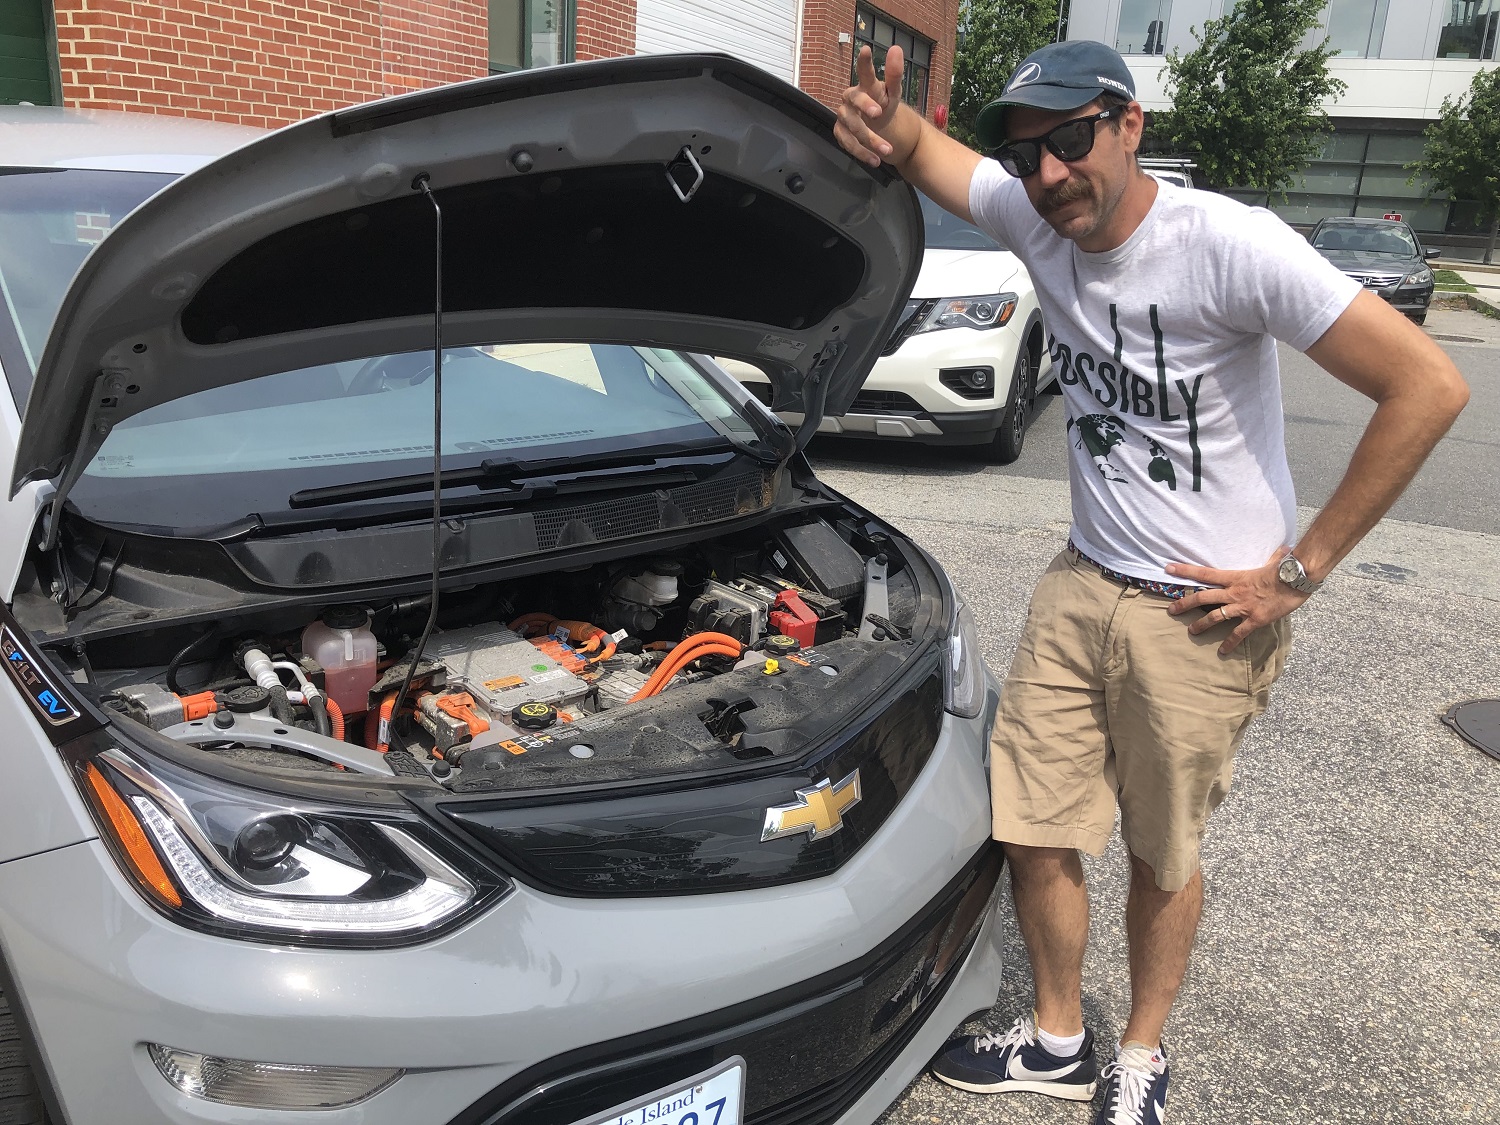 Ryan T Conaty shows off what's under the hood of his EV